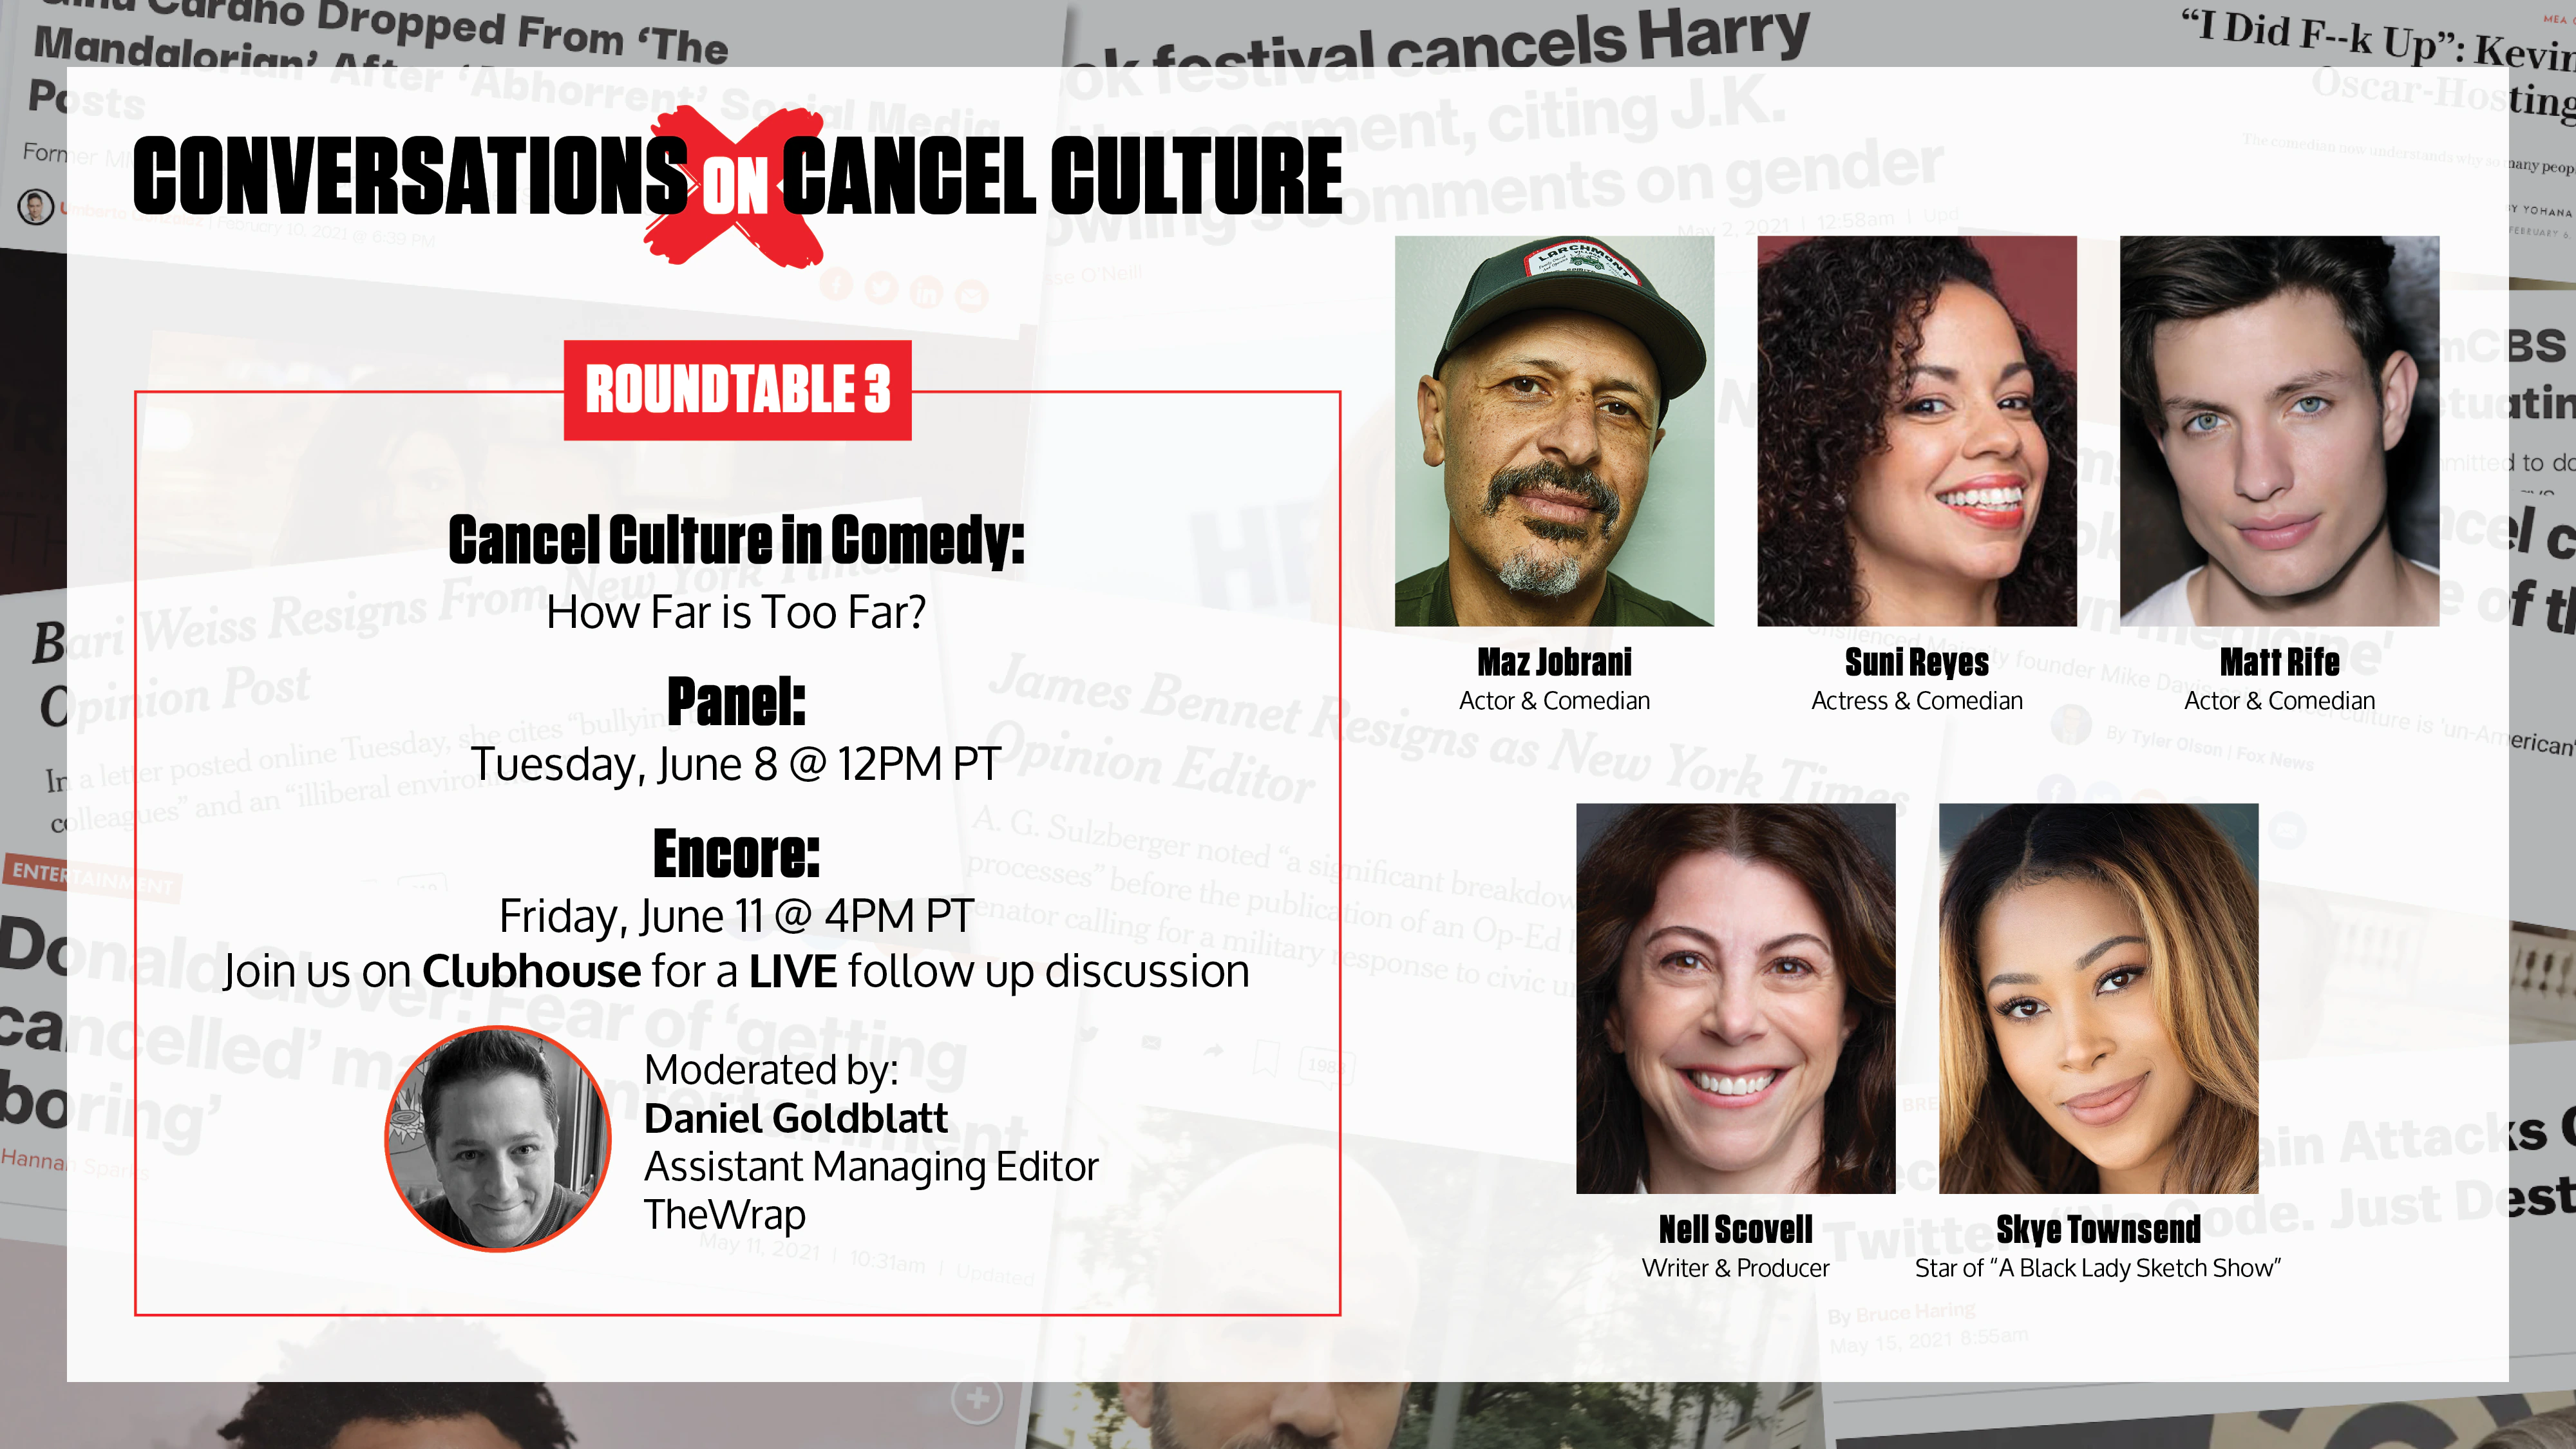 Join a Conversation on ‘Assassinate Culture in Comedy’ with Maz Jobrani, Skye Townsend, Matt Rife and Suni Reyes